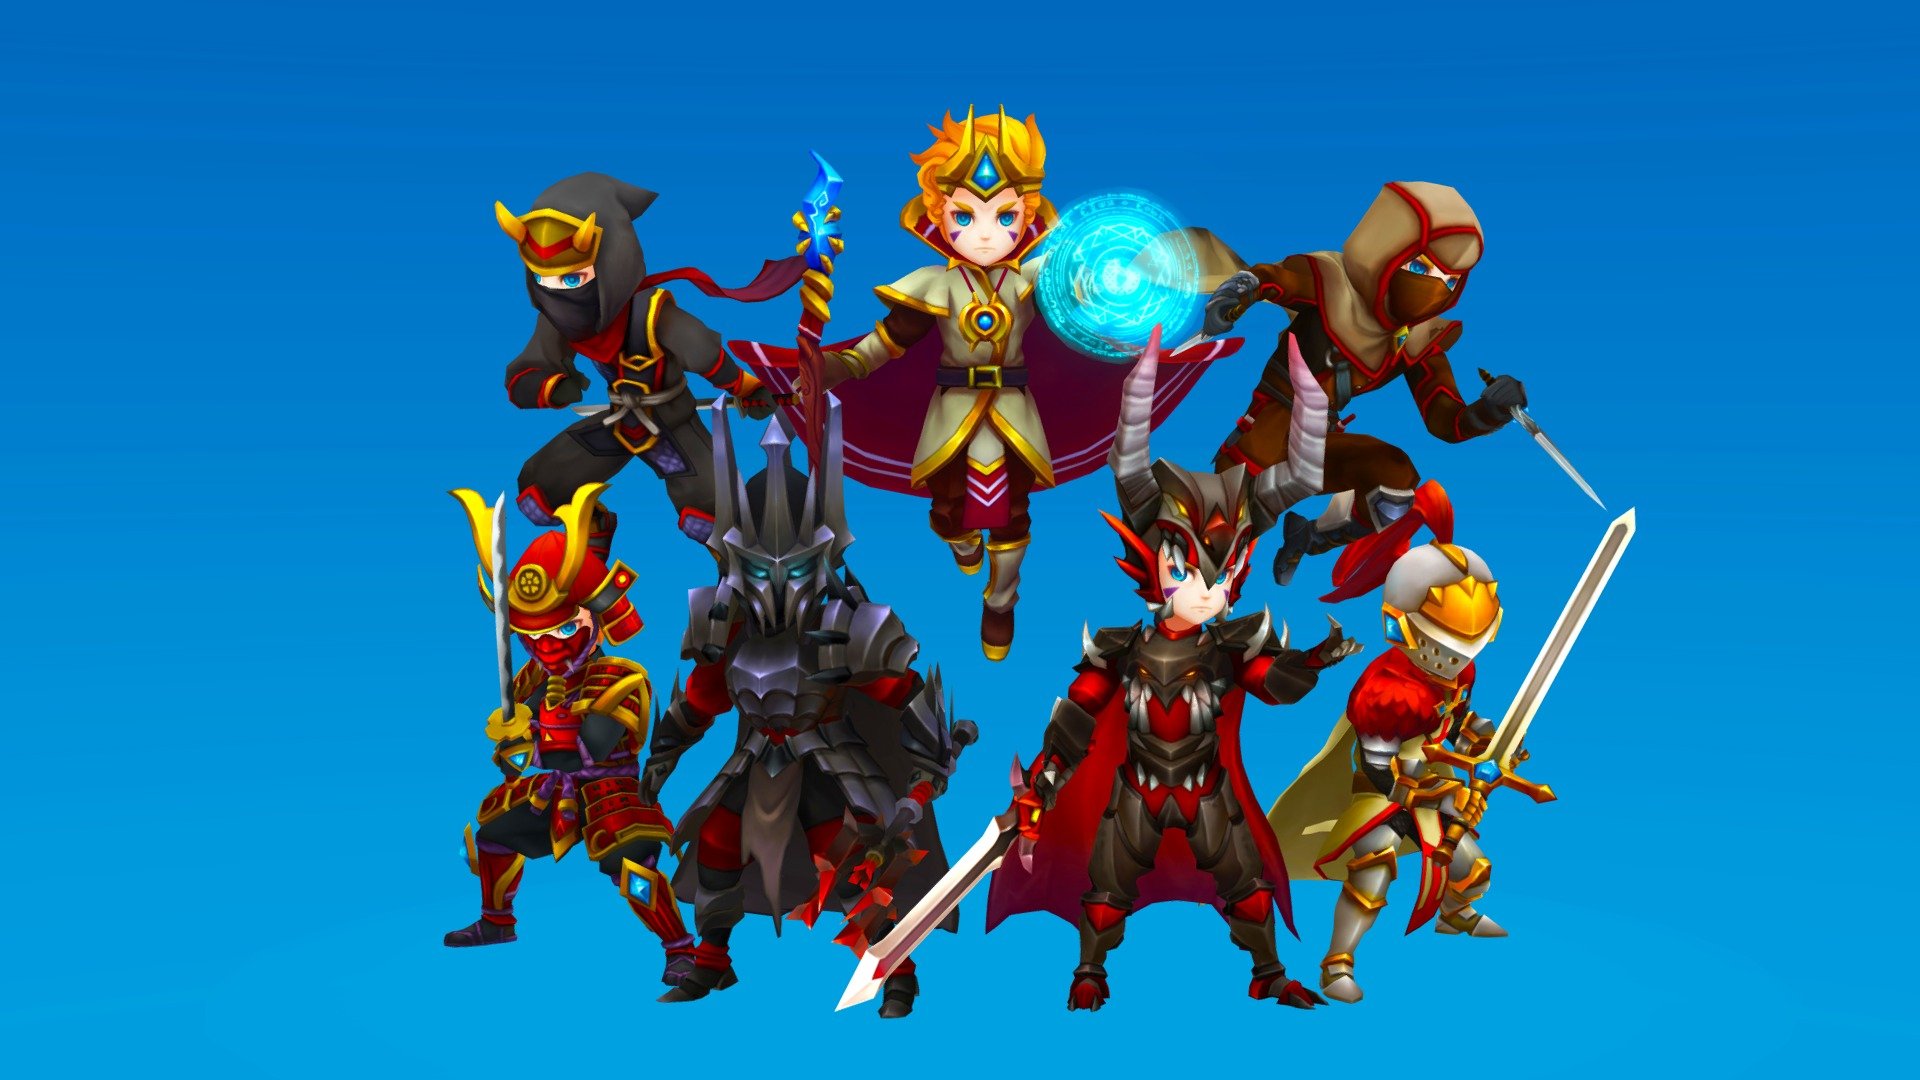 7 armors we built for main character, from 2D concepts to final 3D models in Cloud kingdom project. Each armor has special design to describe its unique traits and characteristics. All are low poly models with stylized handpainted texture.
See more hires available at: https://www.artstation.com/artwork/ybPleK - Cloud Kingdom – Armor Set - 3D model by Thunder Cloud Studio (@thundercloudstudio) 3d model